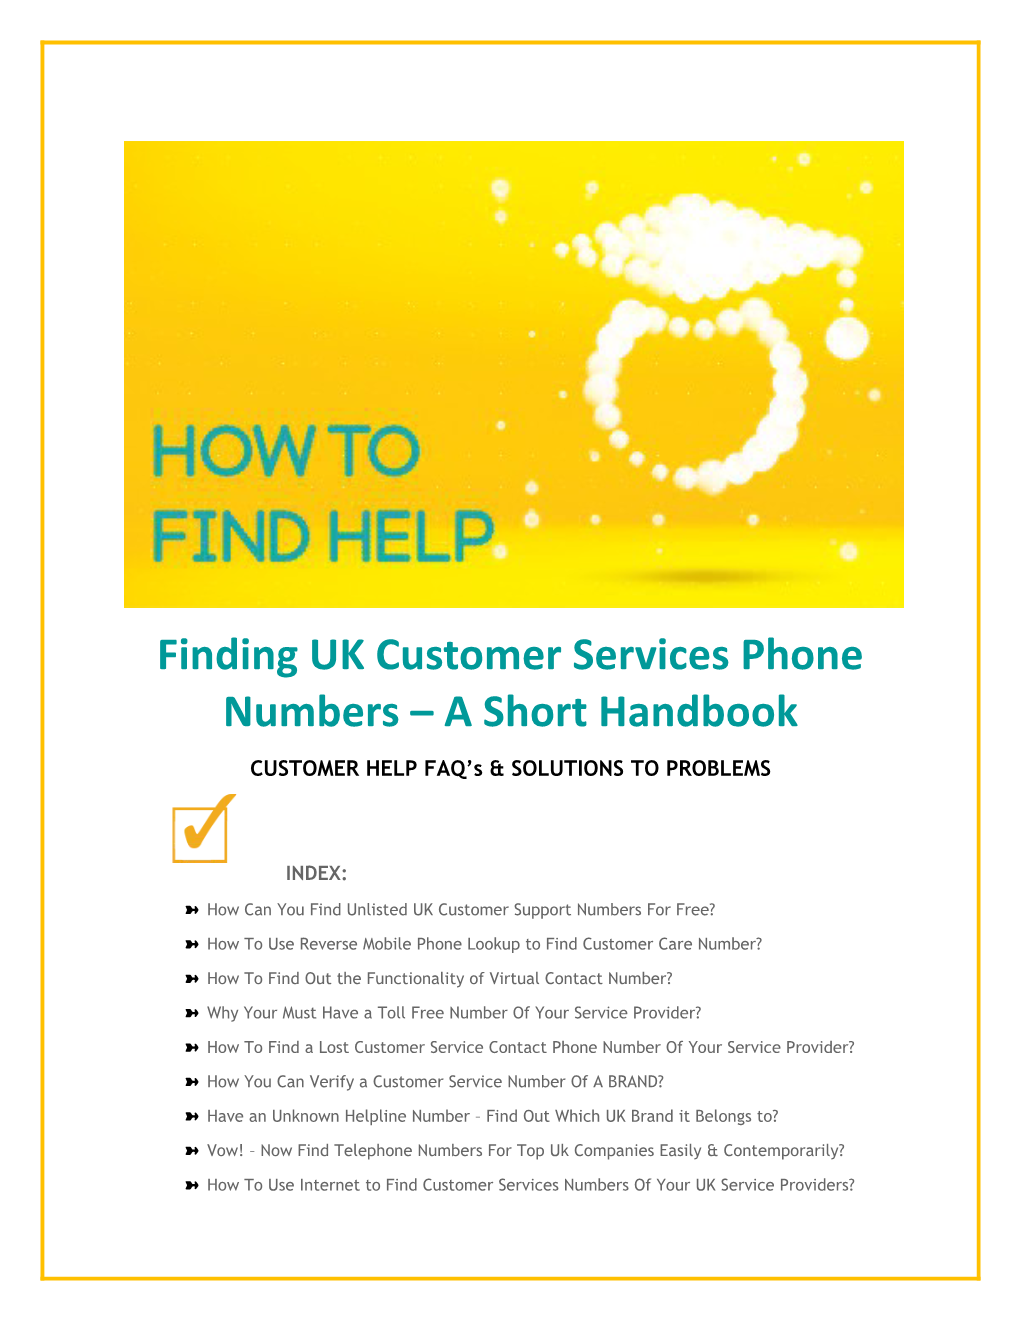 CUSTOMER HELP FAQ S & SOLUTIONS to PROBLEMS